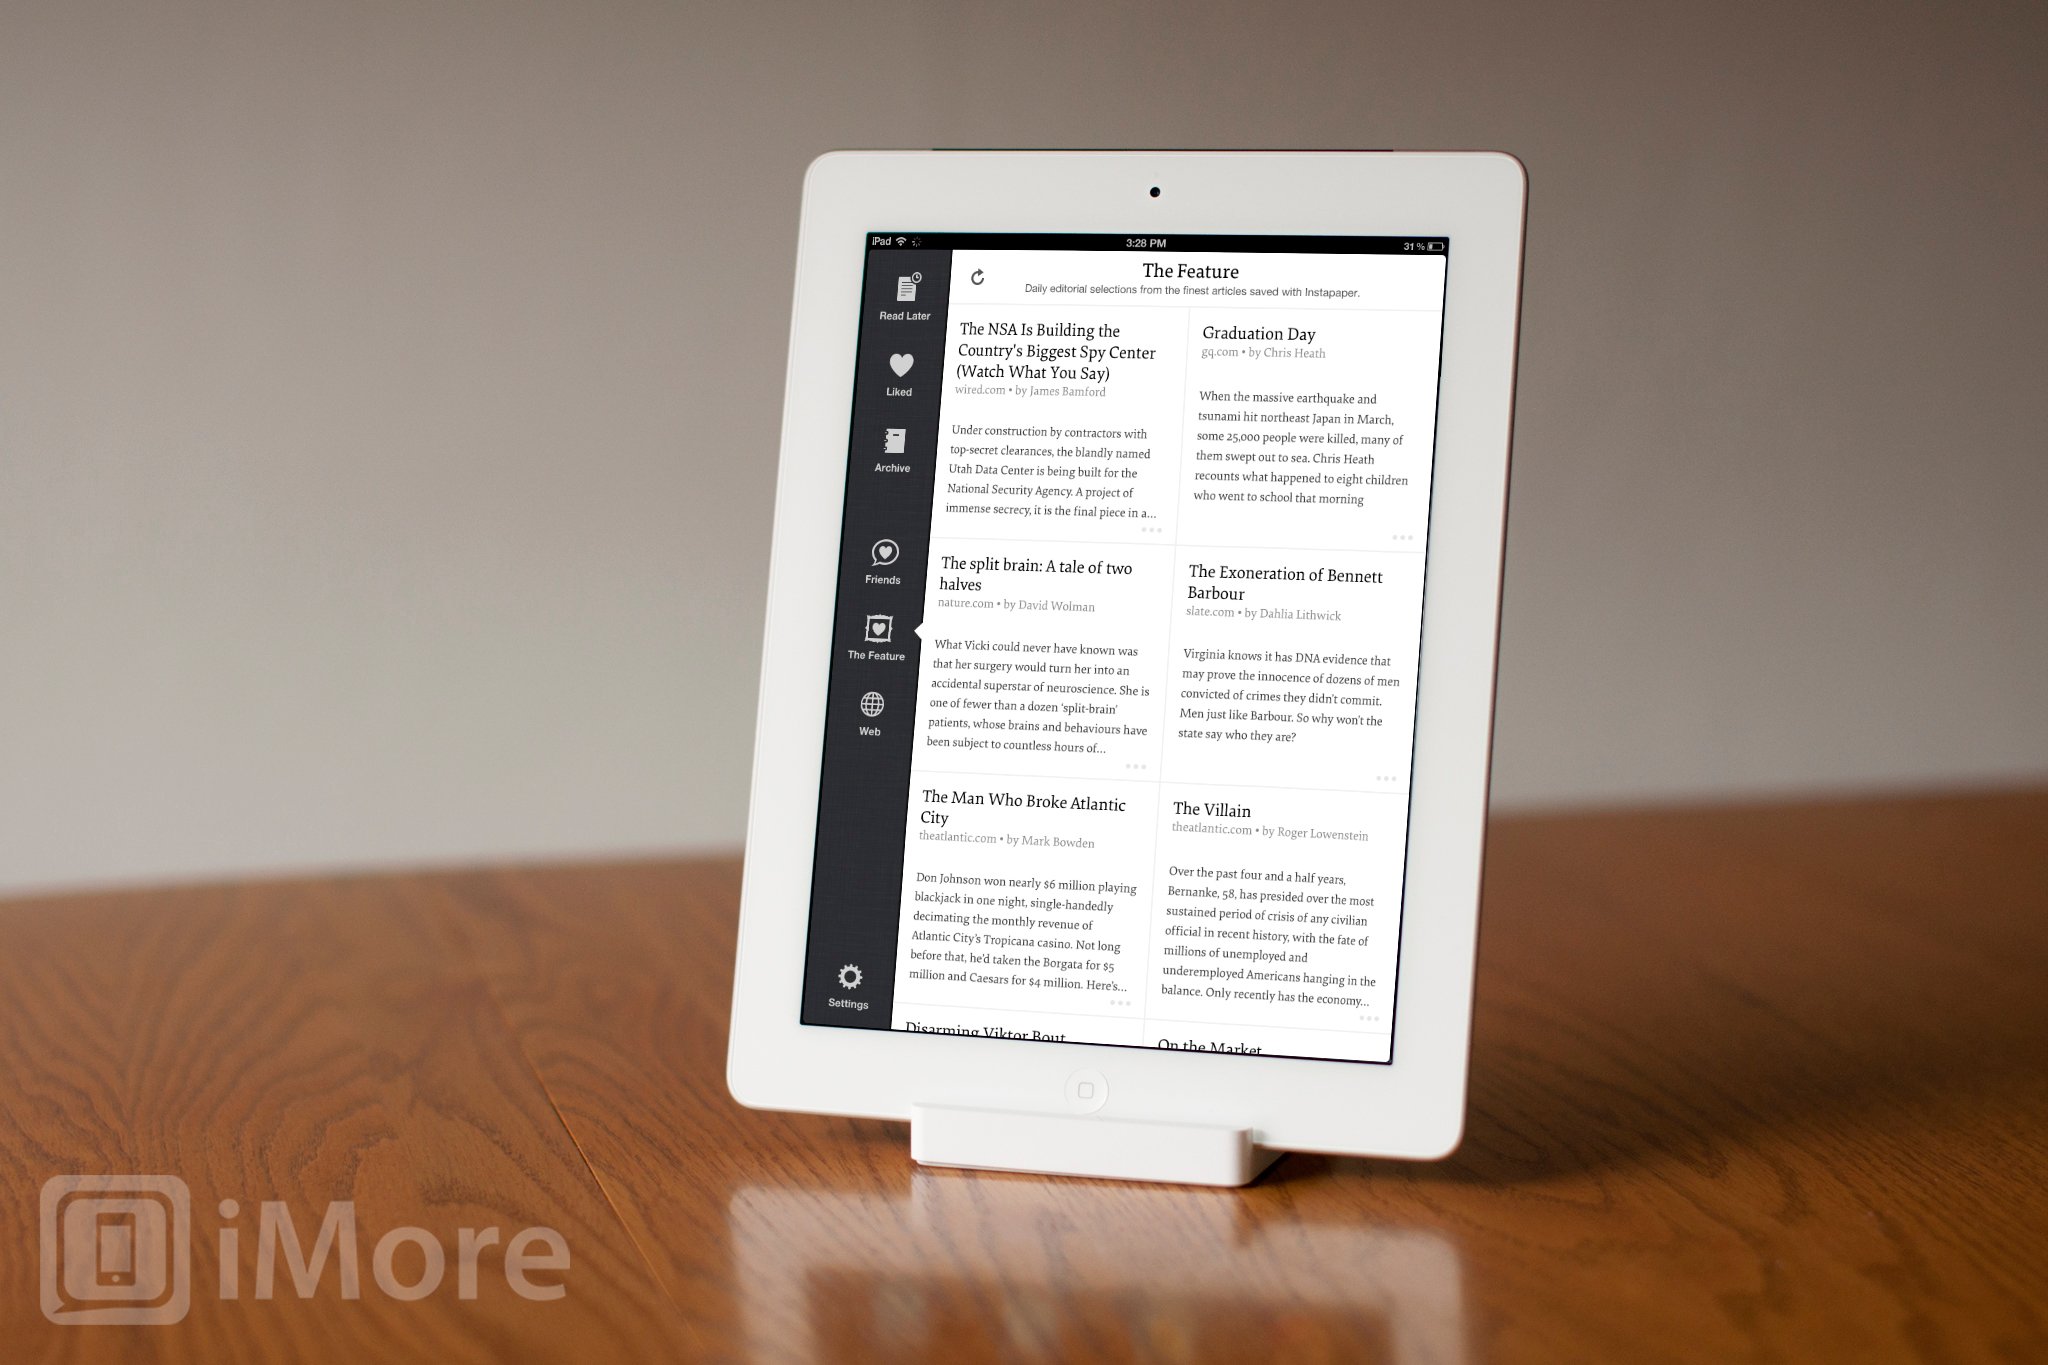 Catch up on your reading with beautiful fonts and retina graphics with Instapaper for iPad